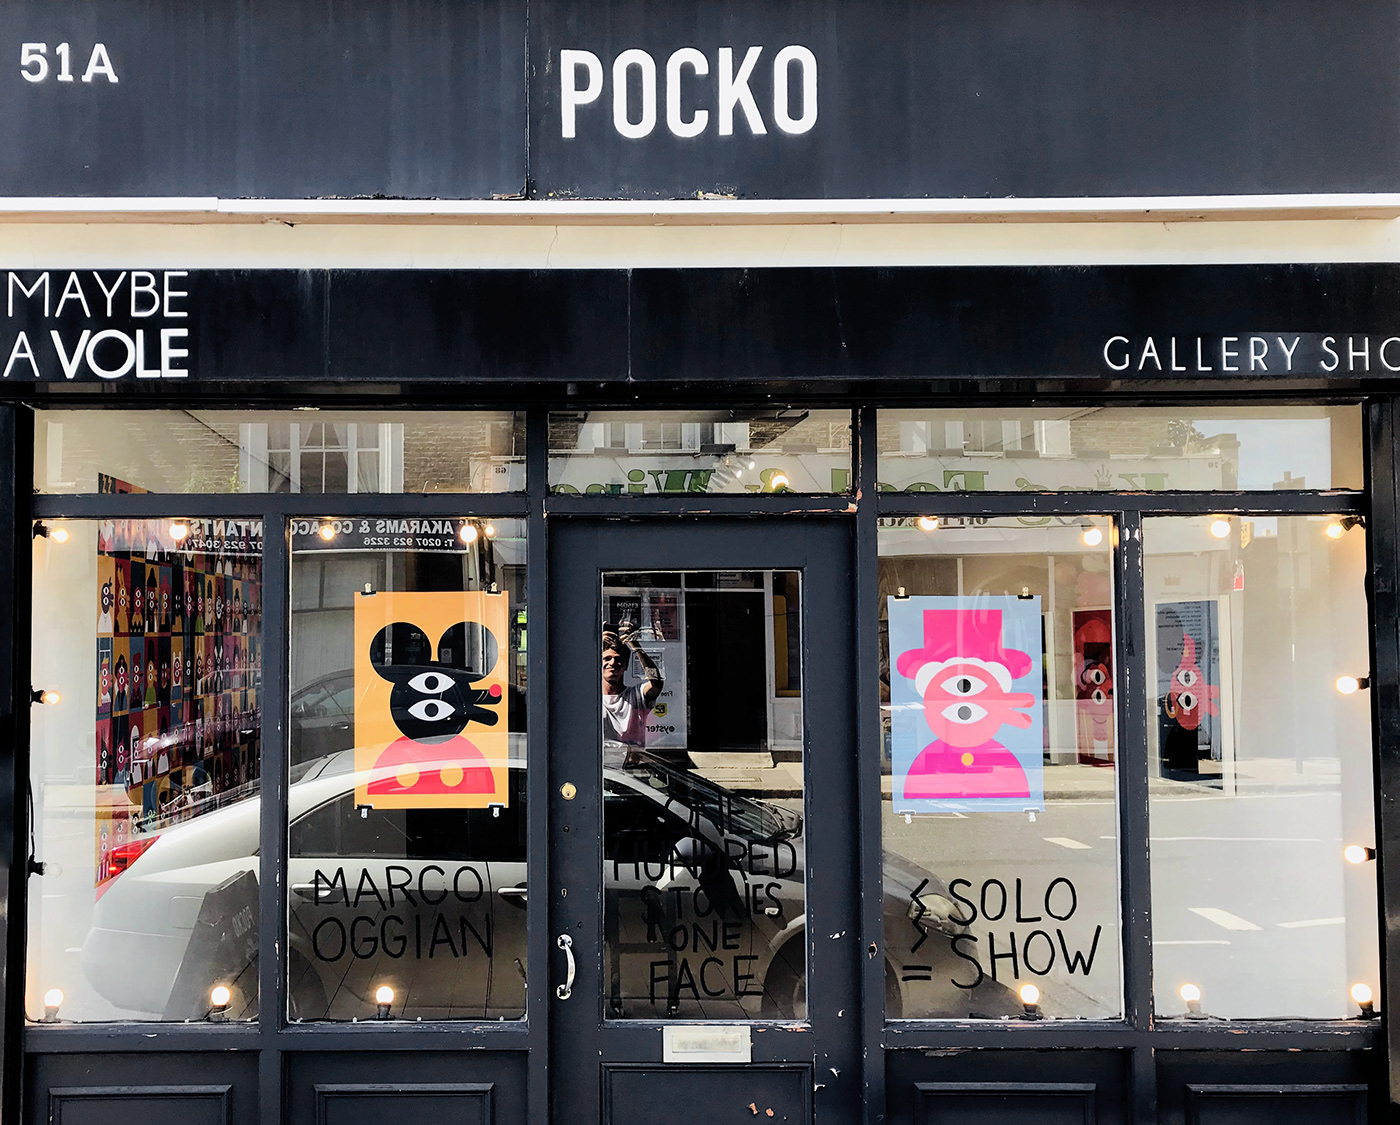 Pocko face London gallery queen elizabeth simplicity characters eyes vernissage Exhibition  vr